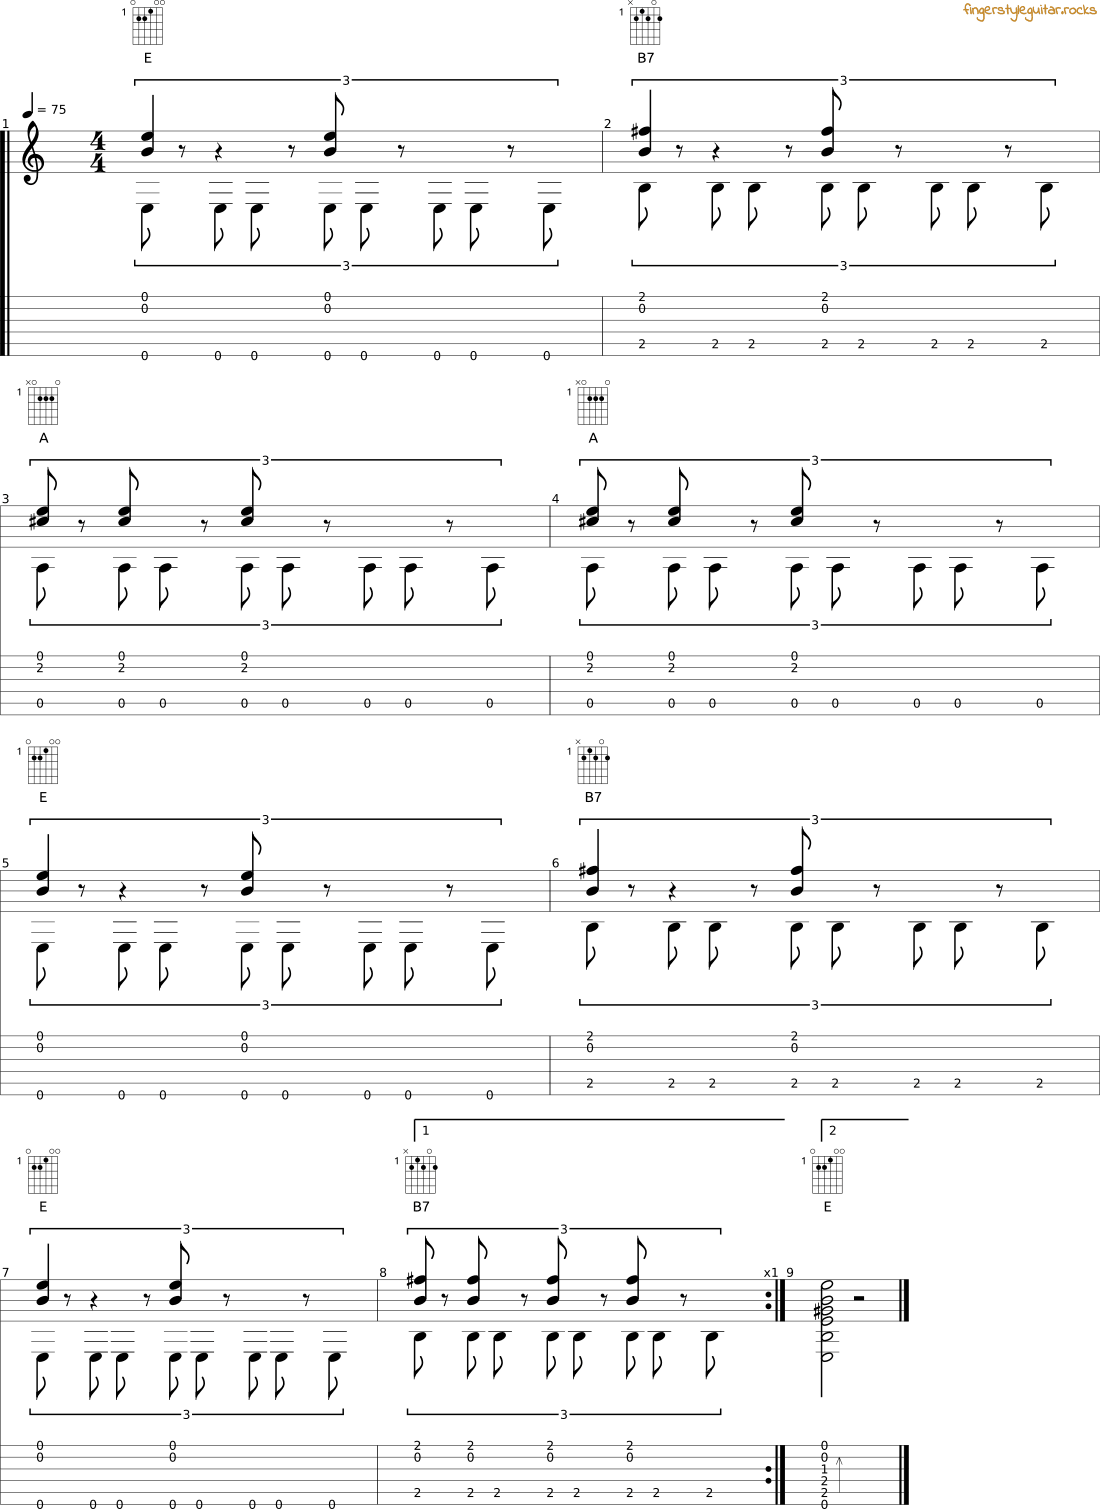 Exercise 2: Blues in E tab